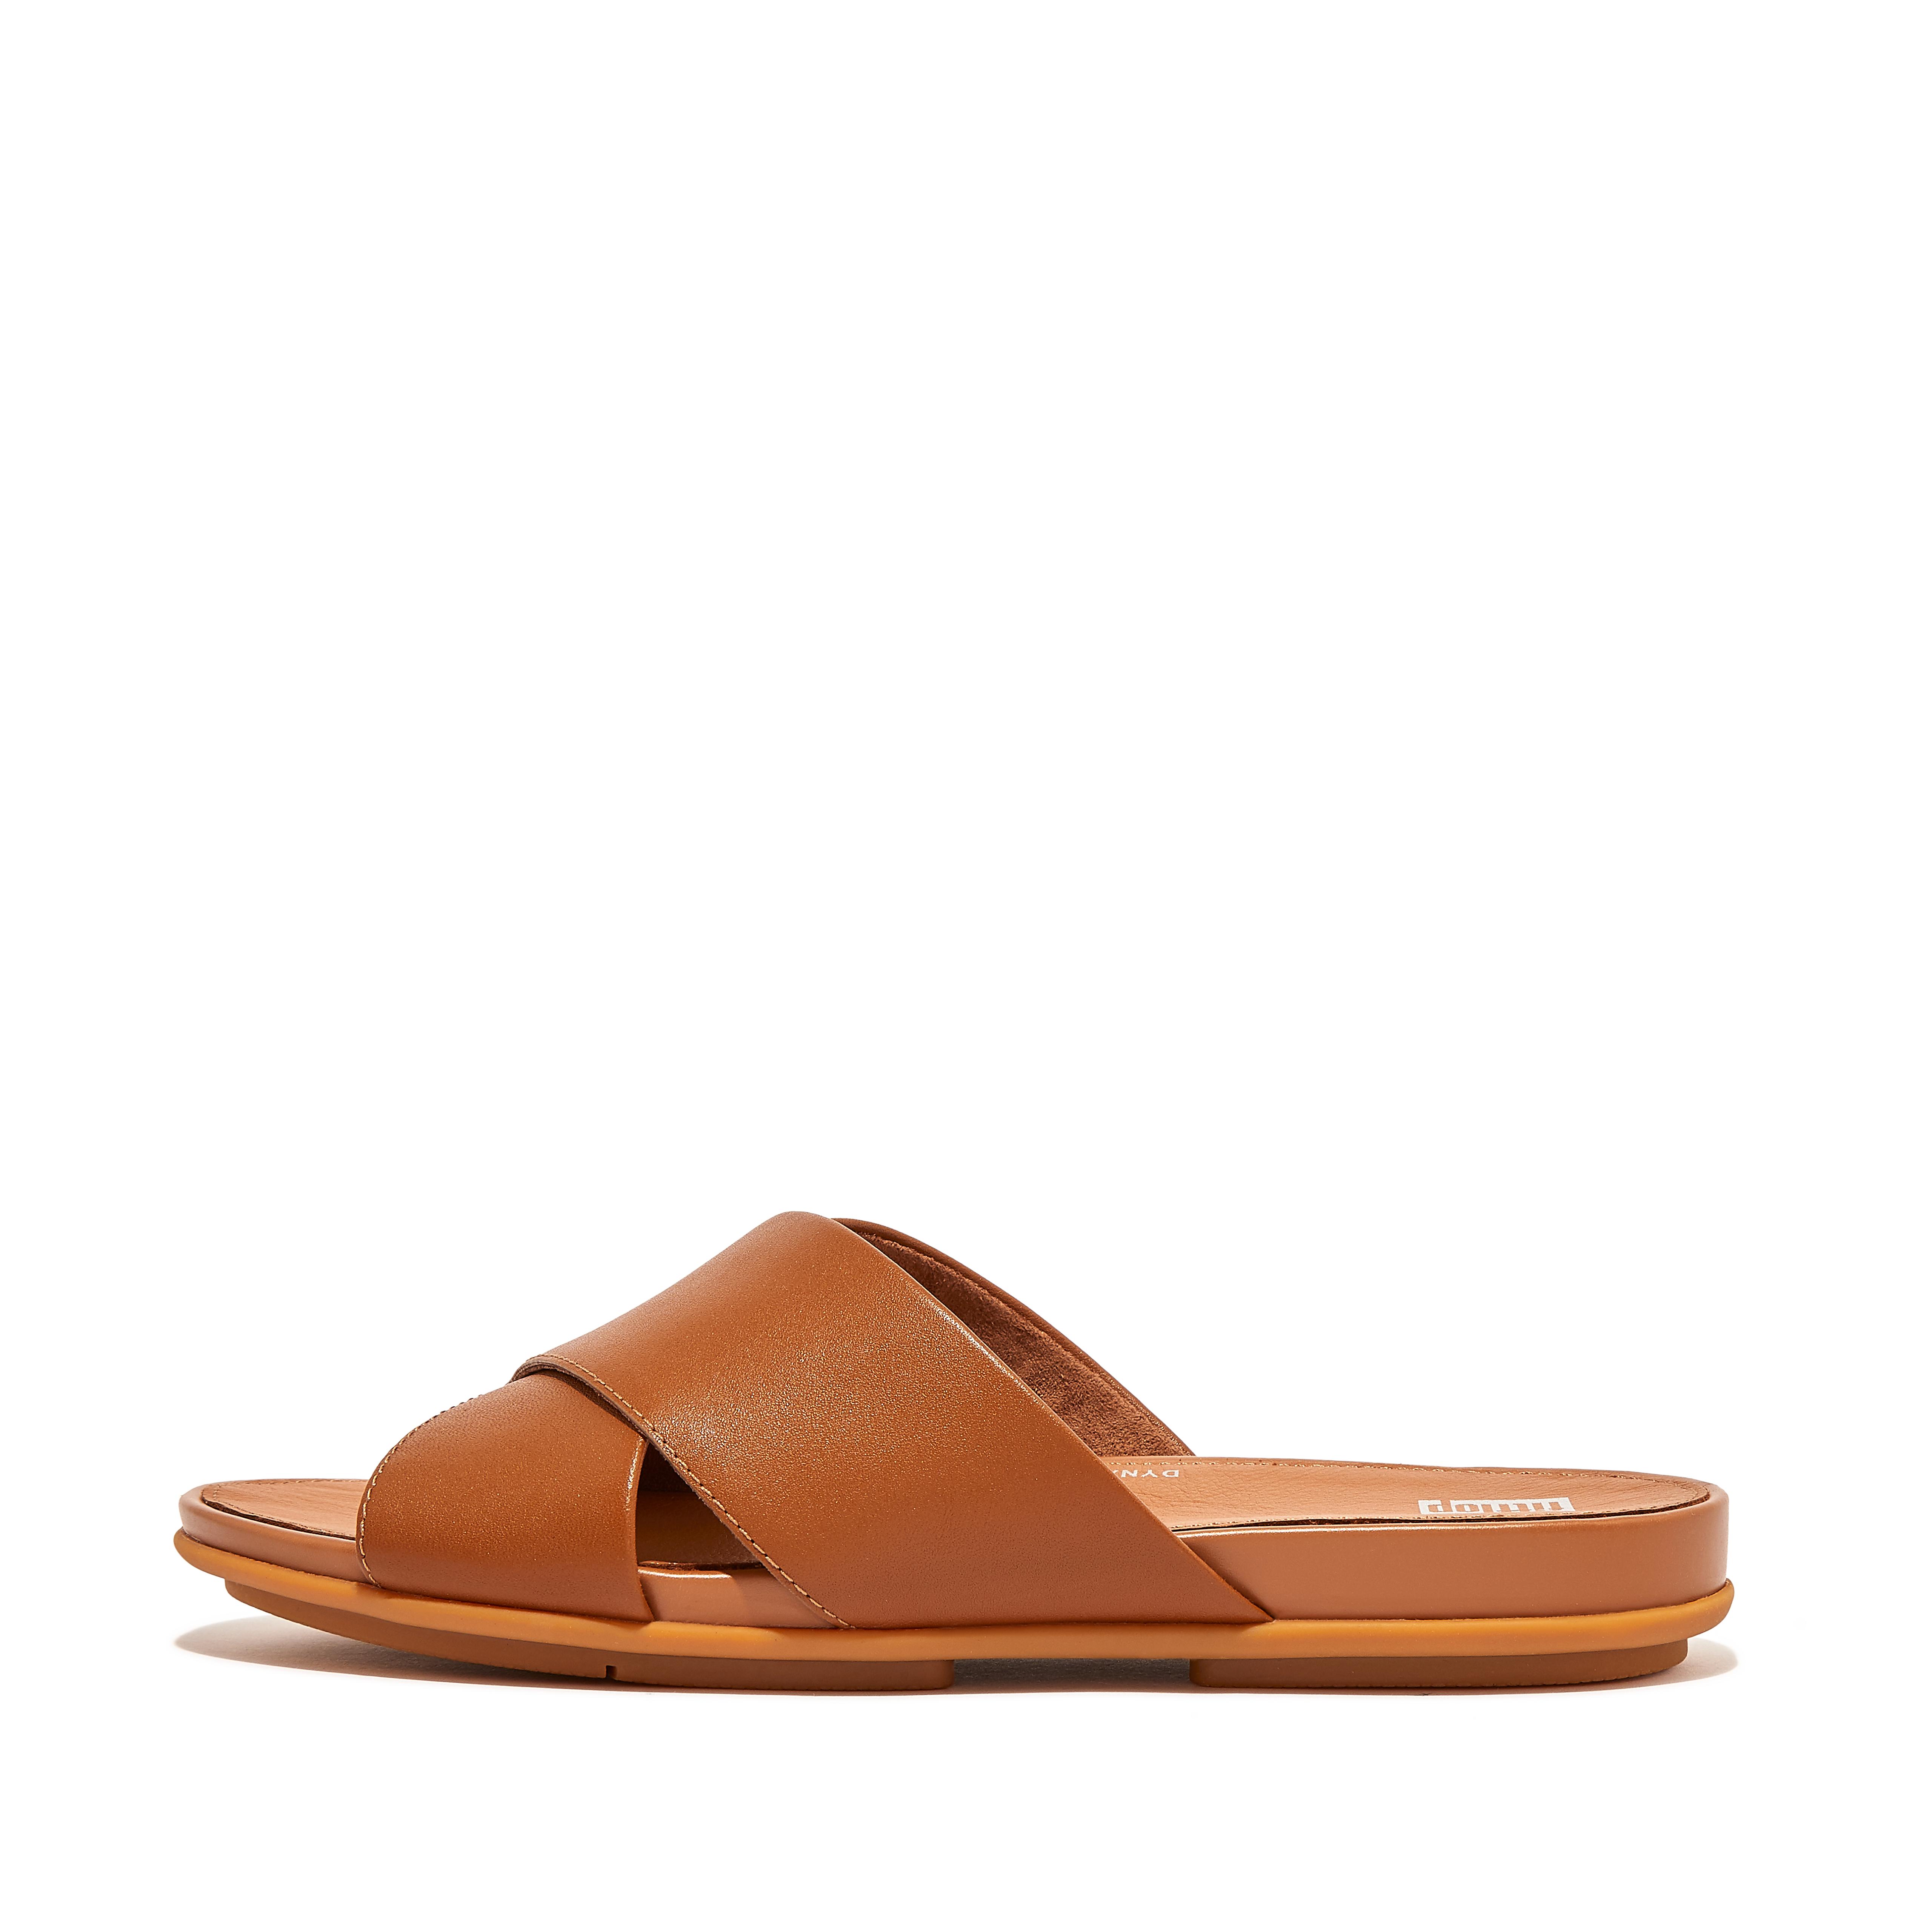 Gracie Leather Cross Slides | FitFlop US